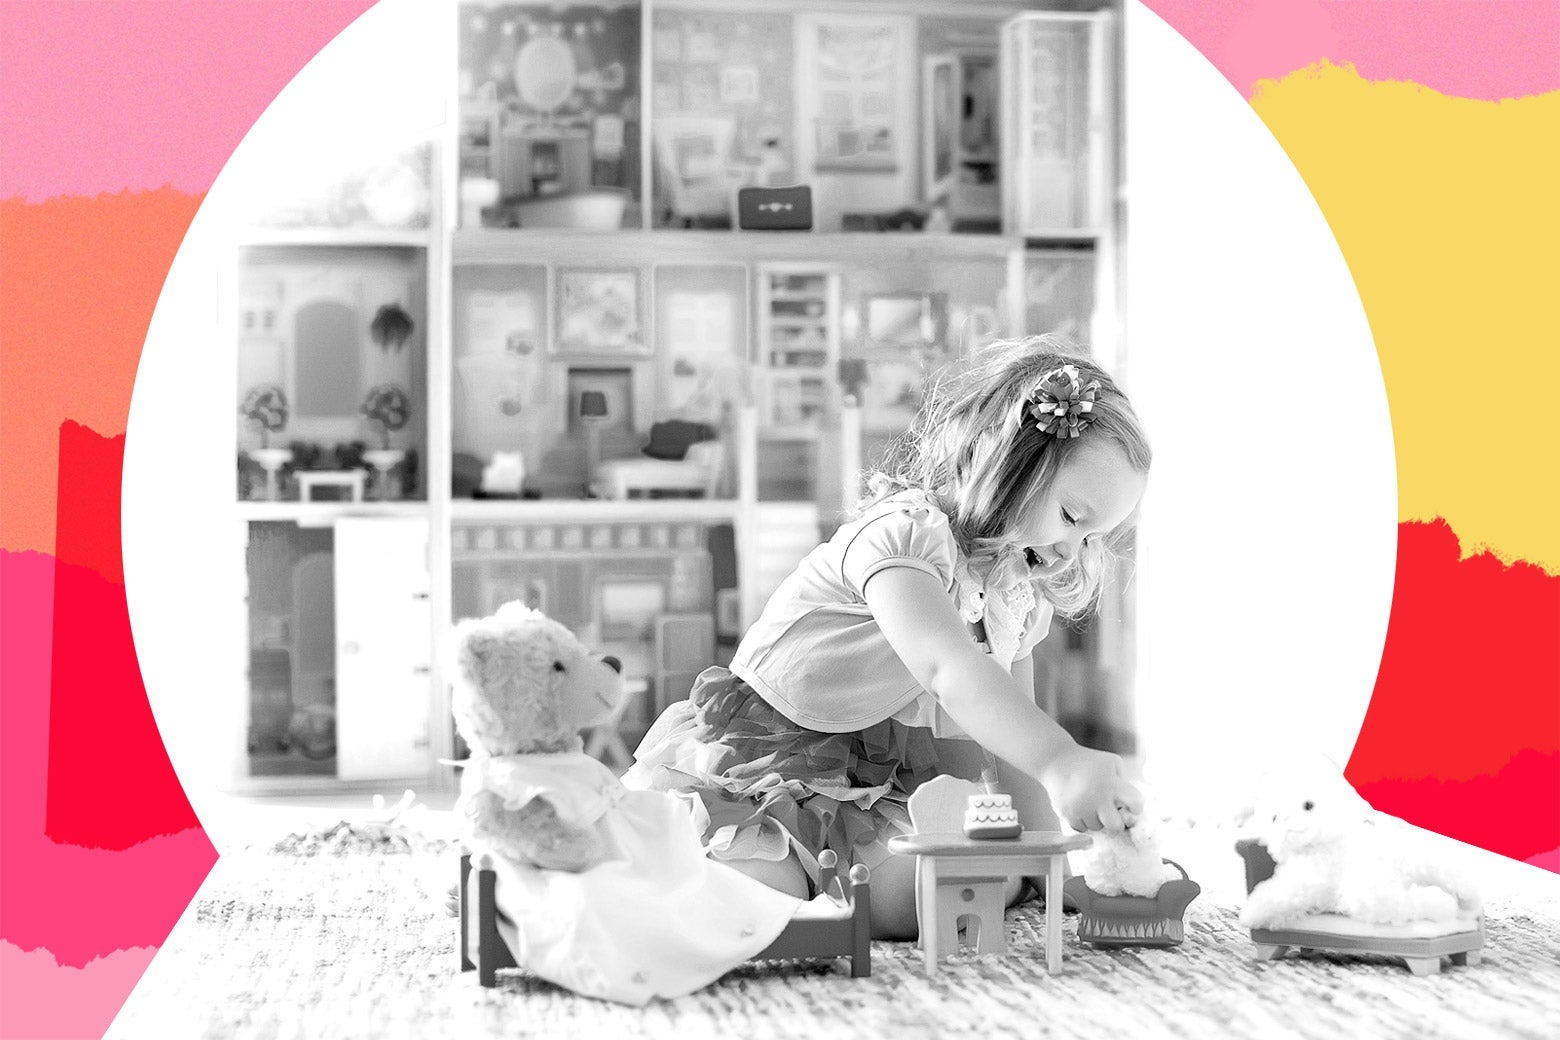 A little girl wearing a dress sits on the floor having tea with her toys in front of a large dollhouse